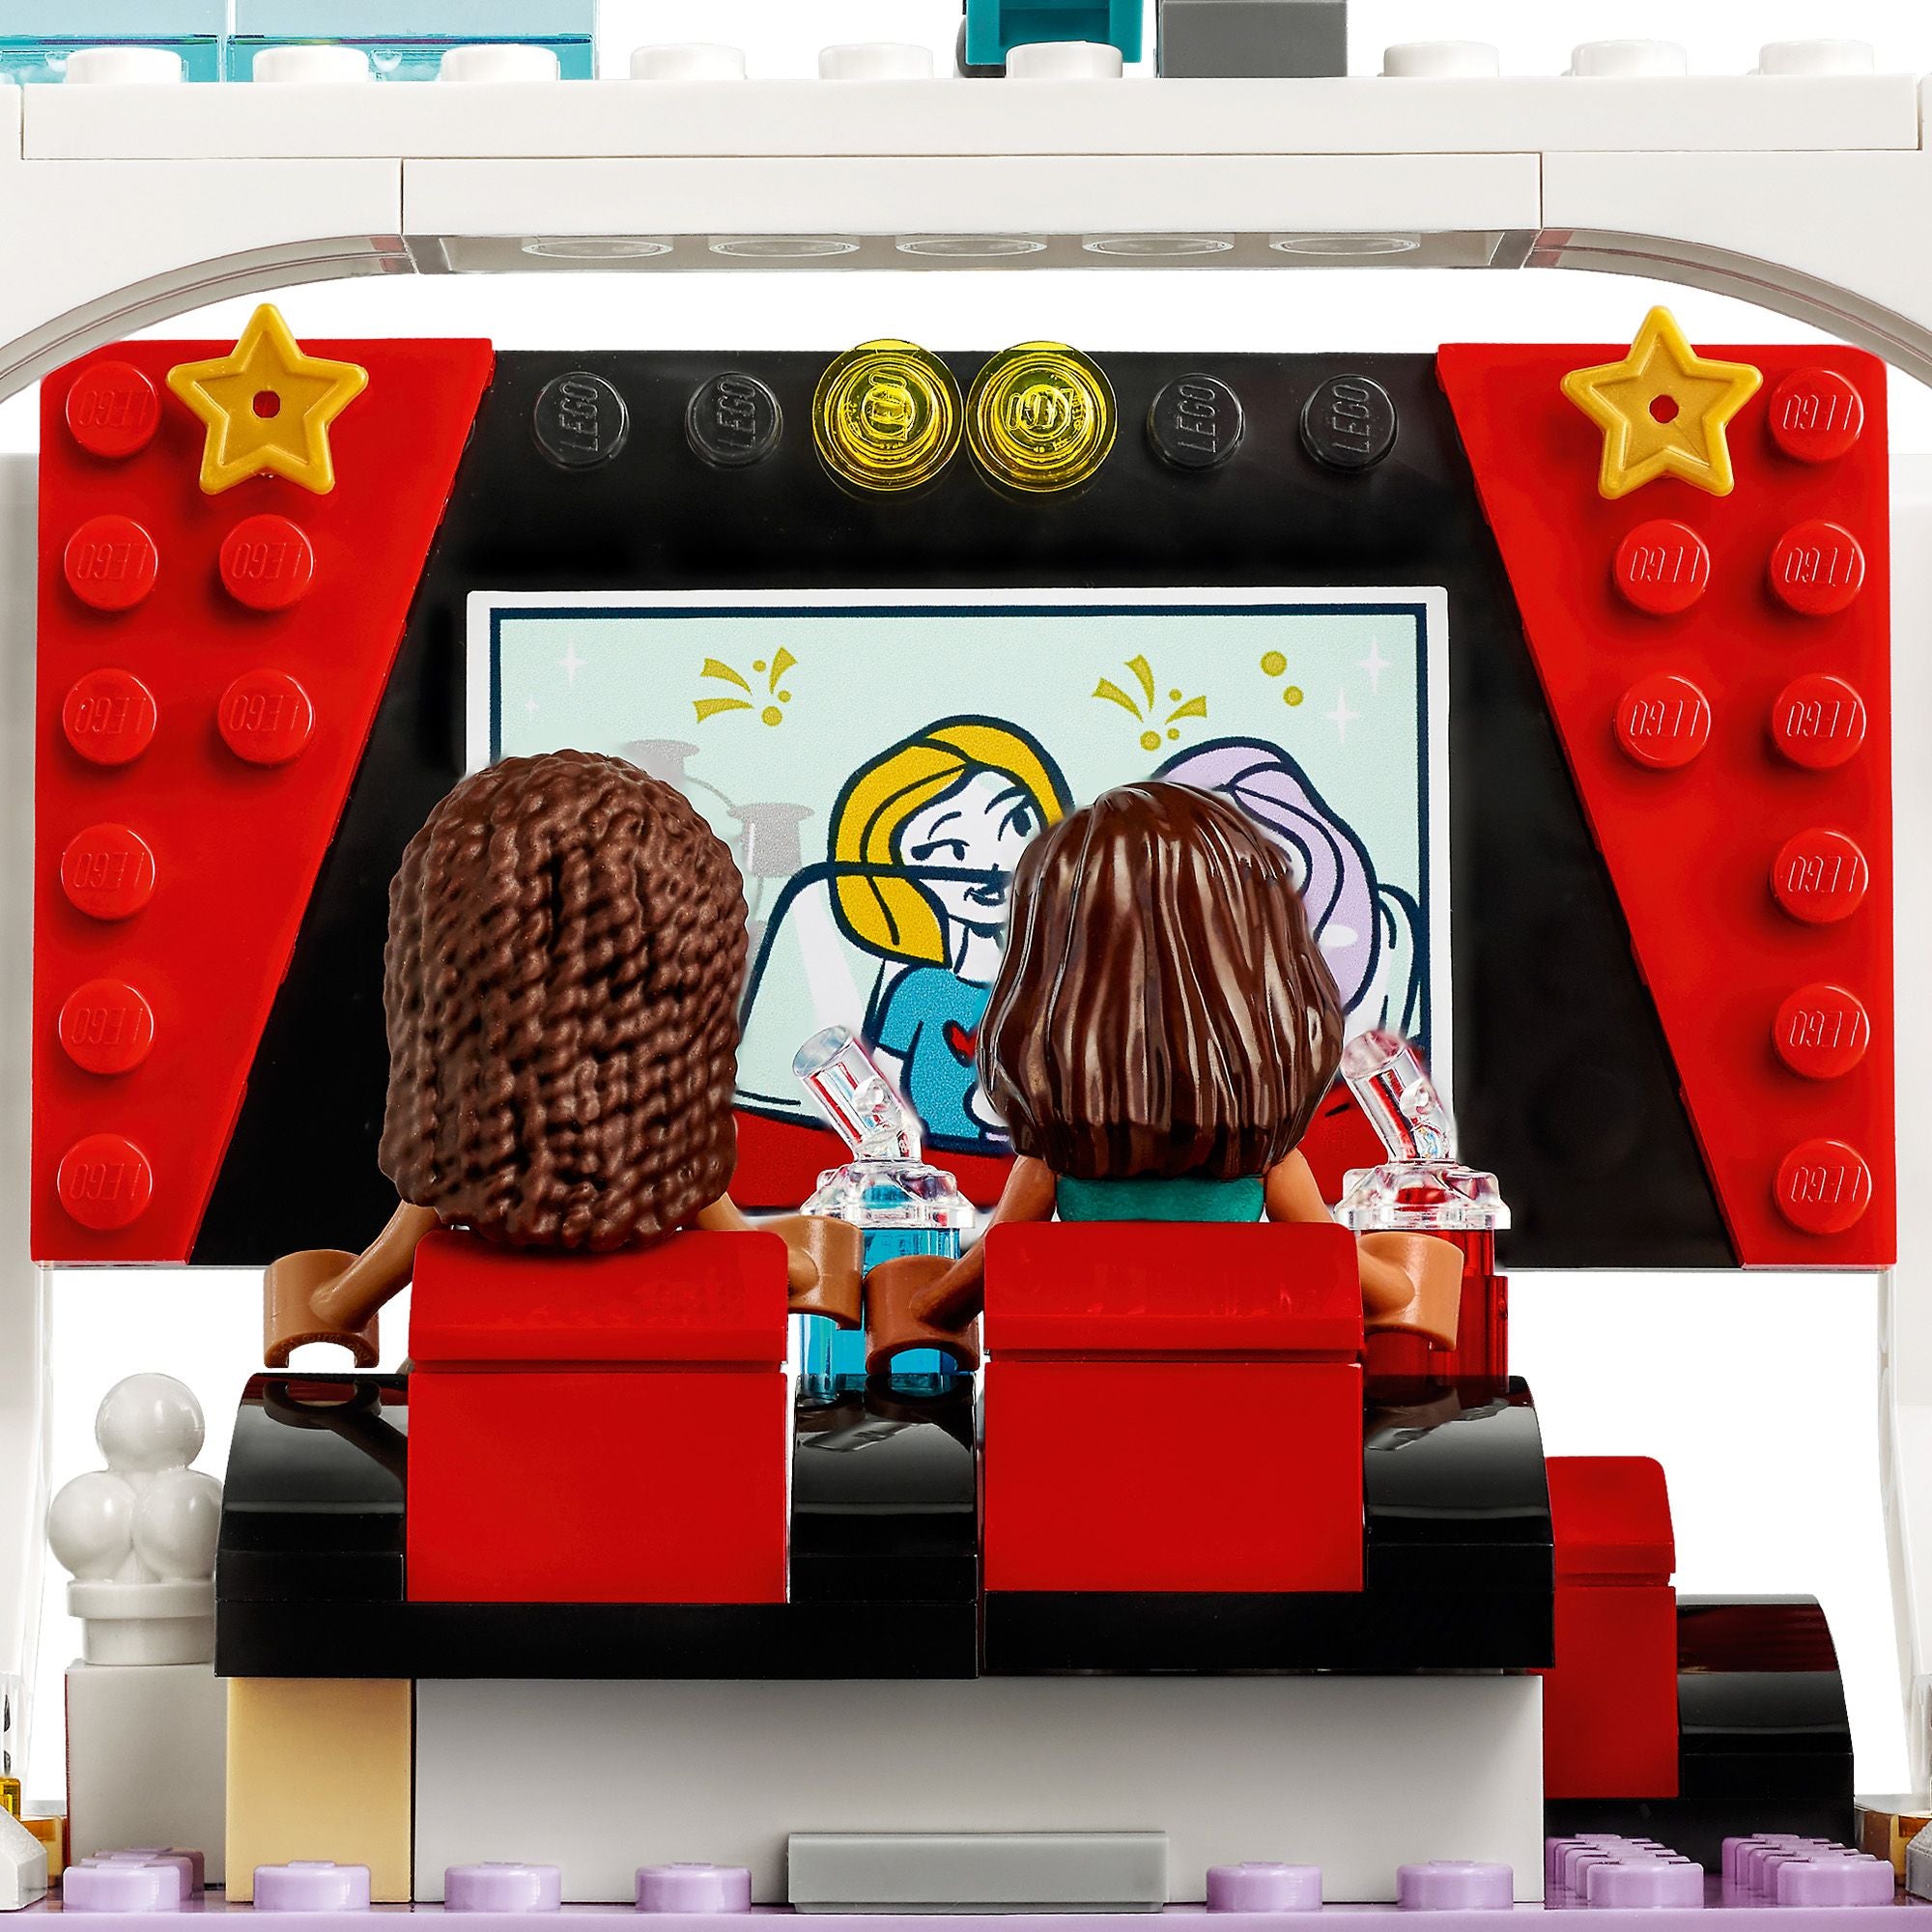 LEGO® Friends Heartlake City Movie Theater Toy  41448 Default Title